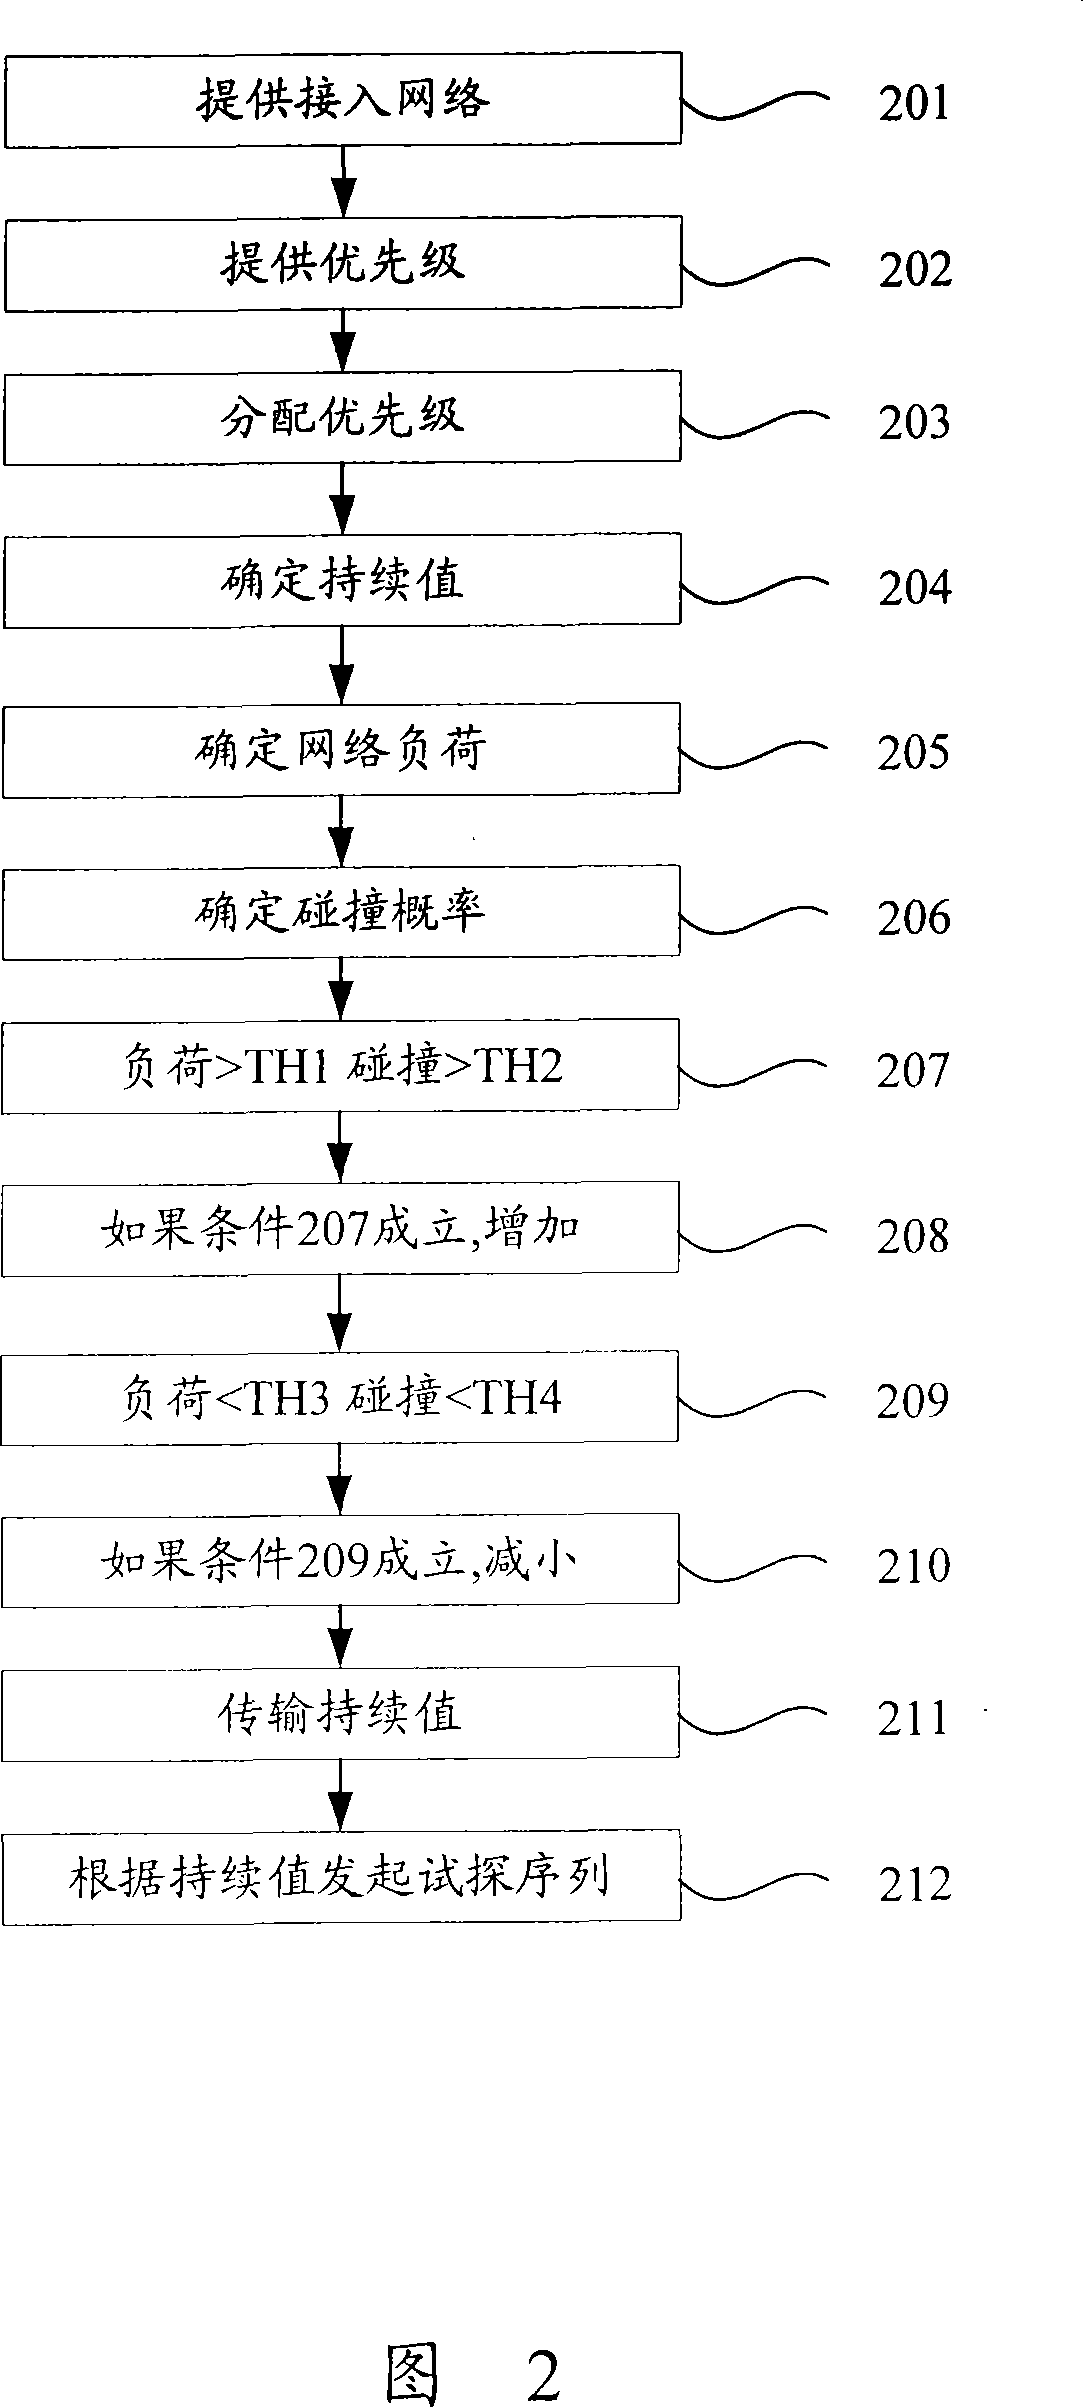 Method and system for wireless network connection